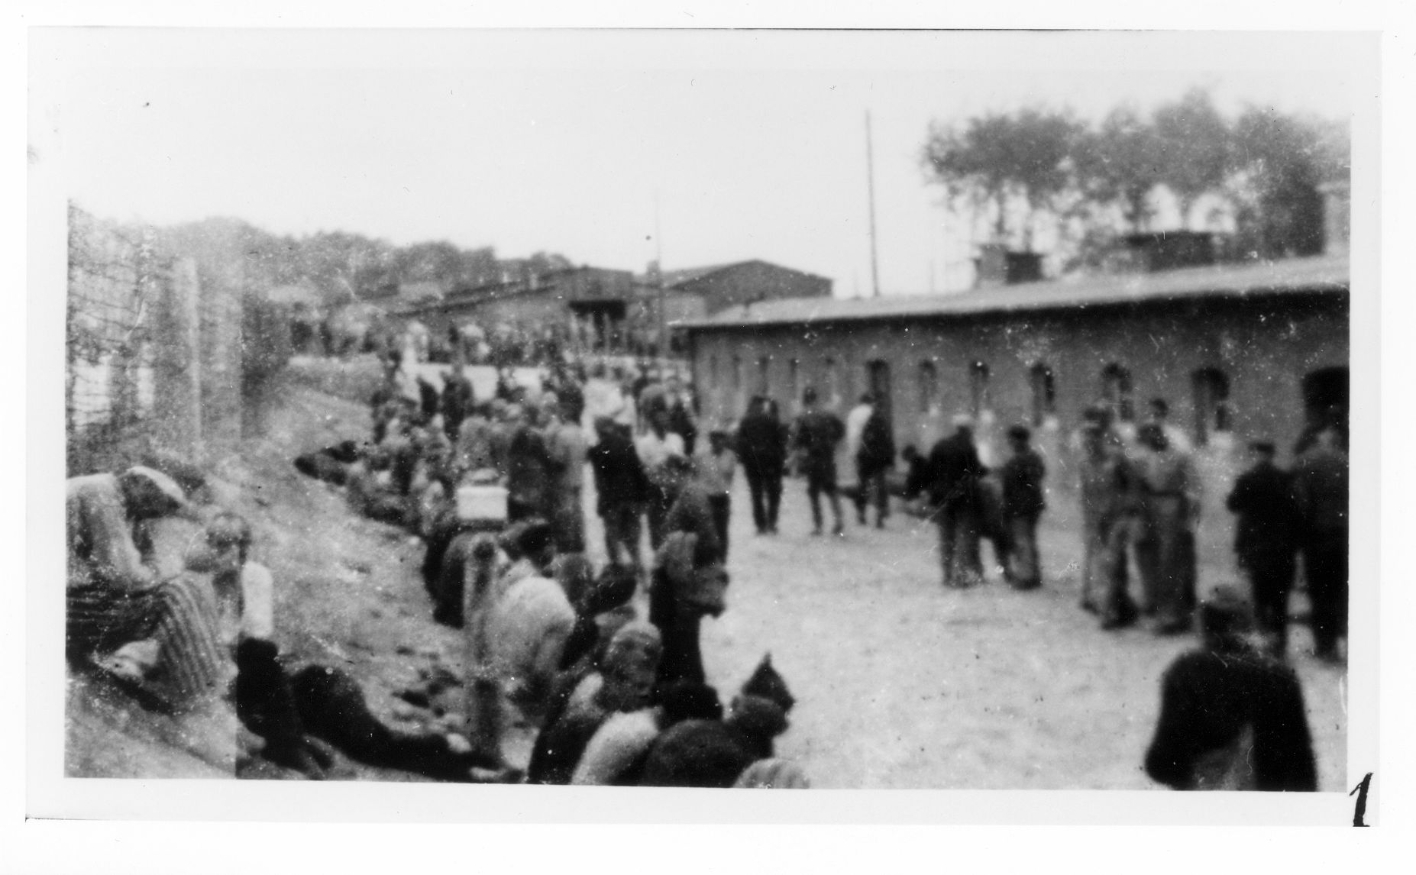 Prisoners on the camp road in front of the latrine and washroom building in the Small Camp. Barracks 59 and 62 in the background. Many prisoners are sitting by the roadside.